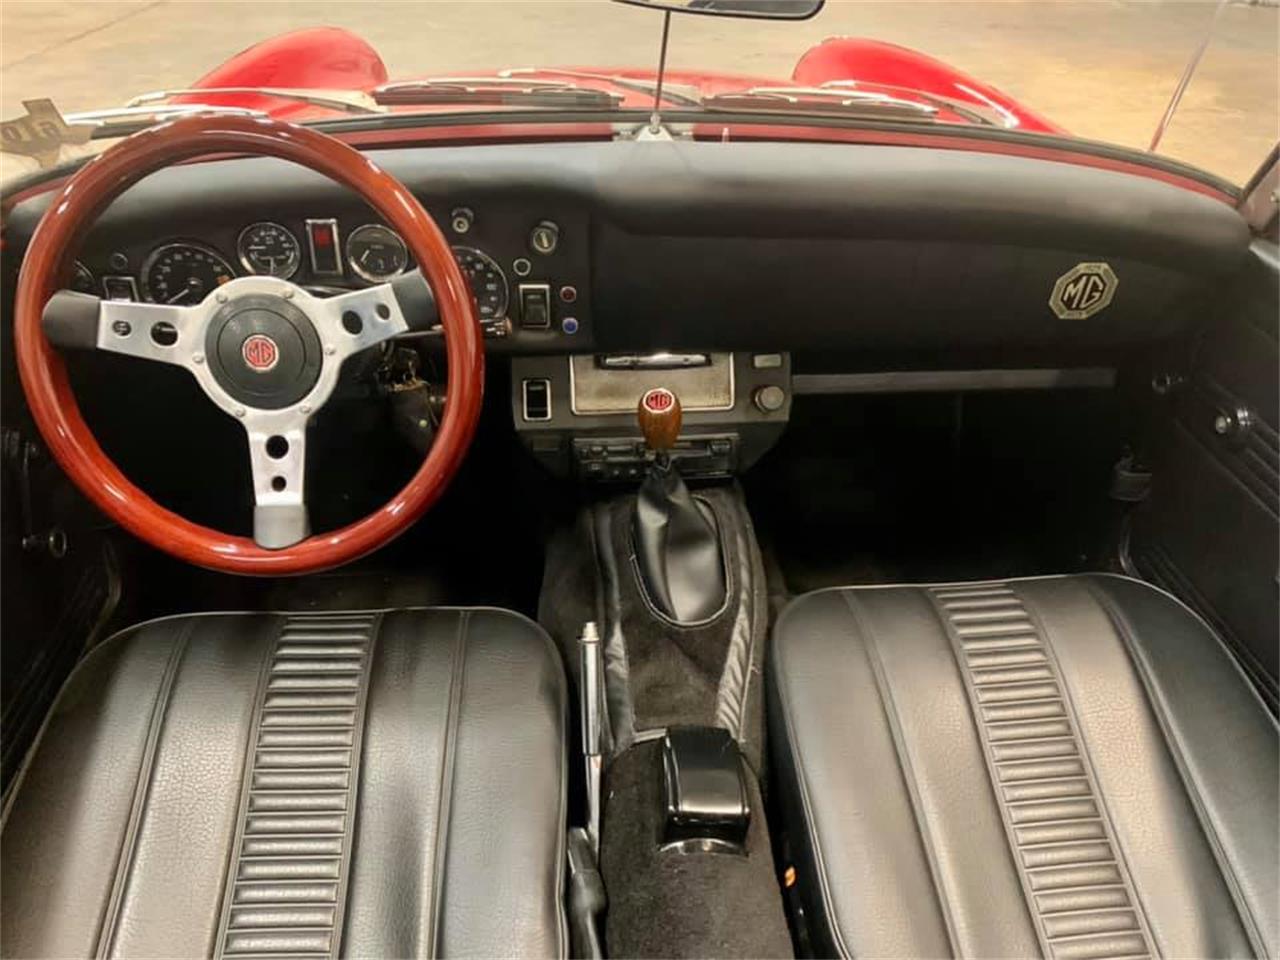 1975 MG Midget for sale in Denison, TX – photo 15